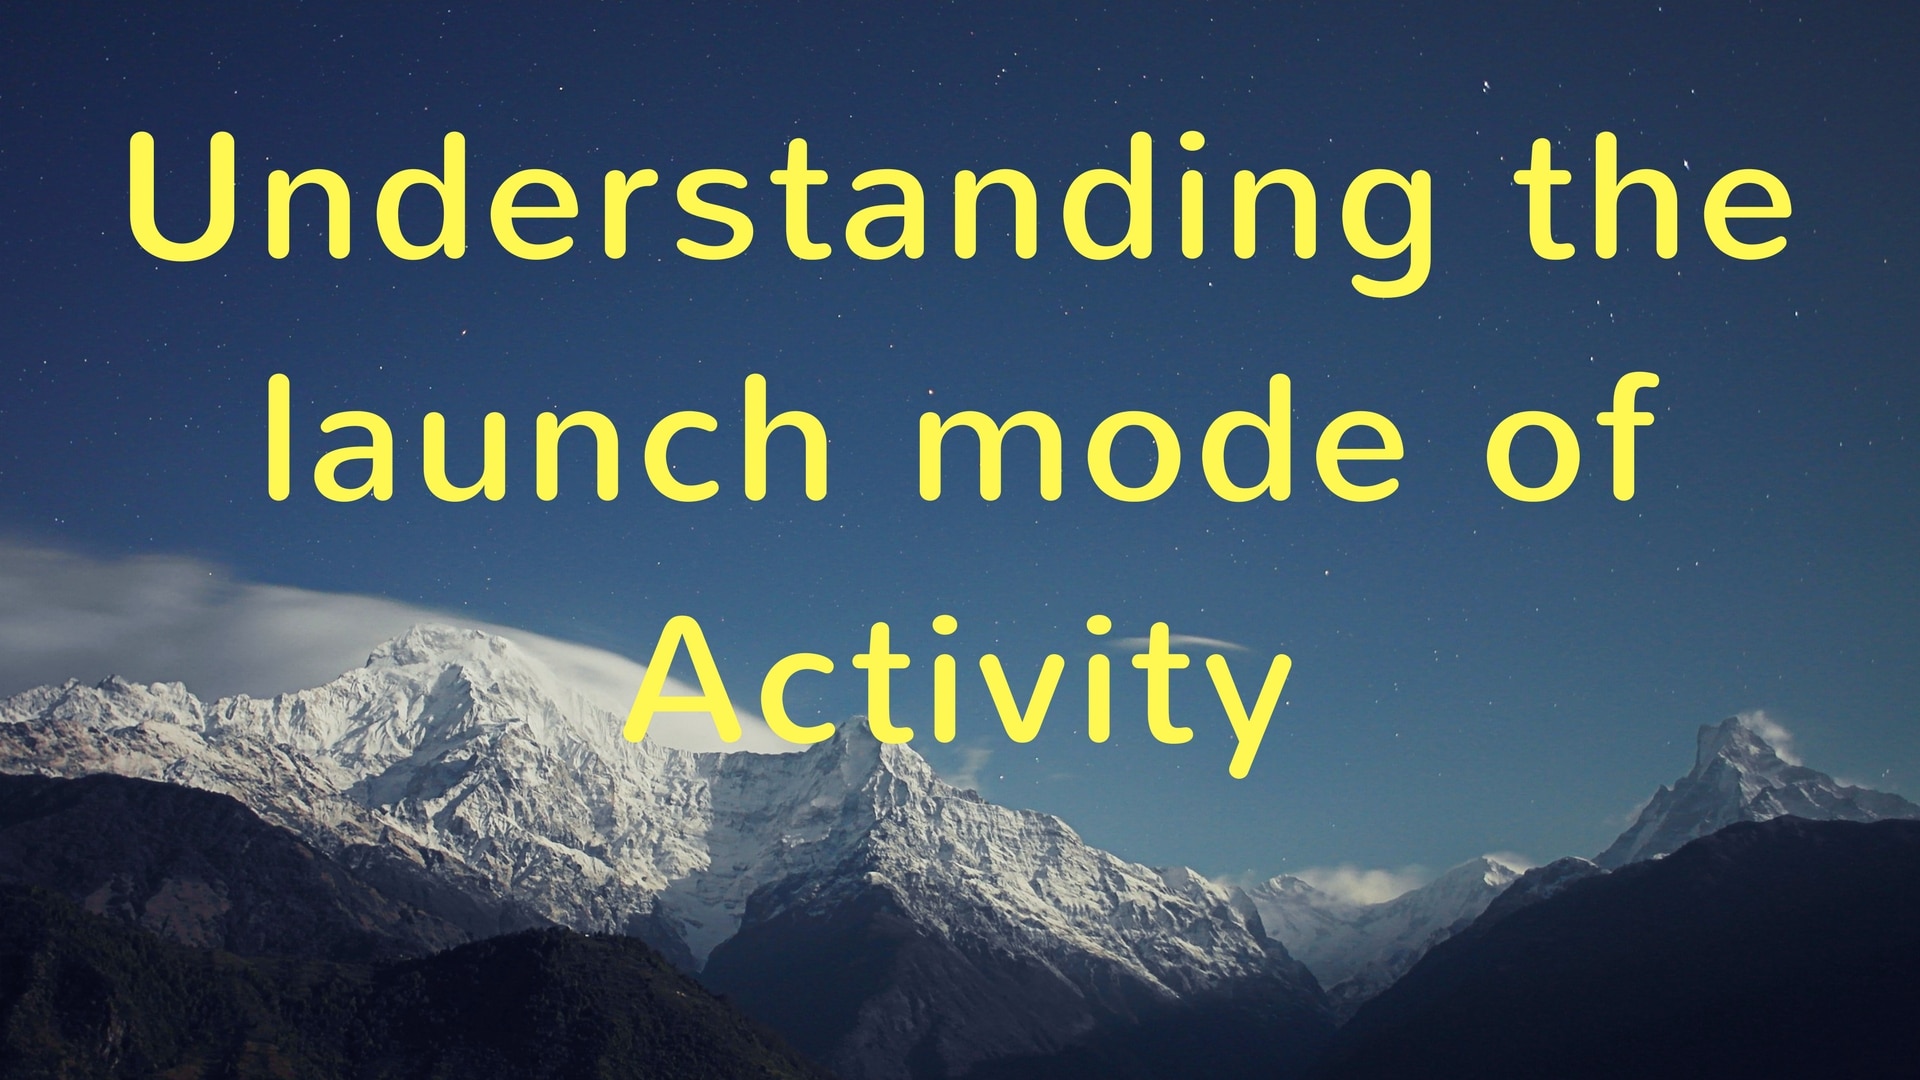 Understanding the launch mode of Activity in Android